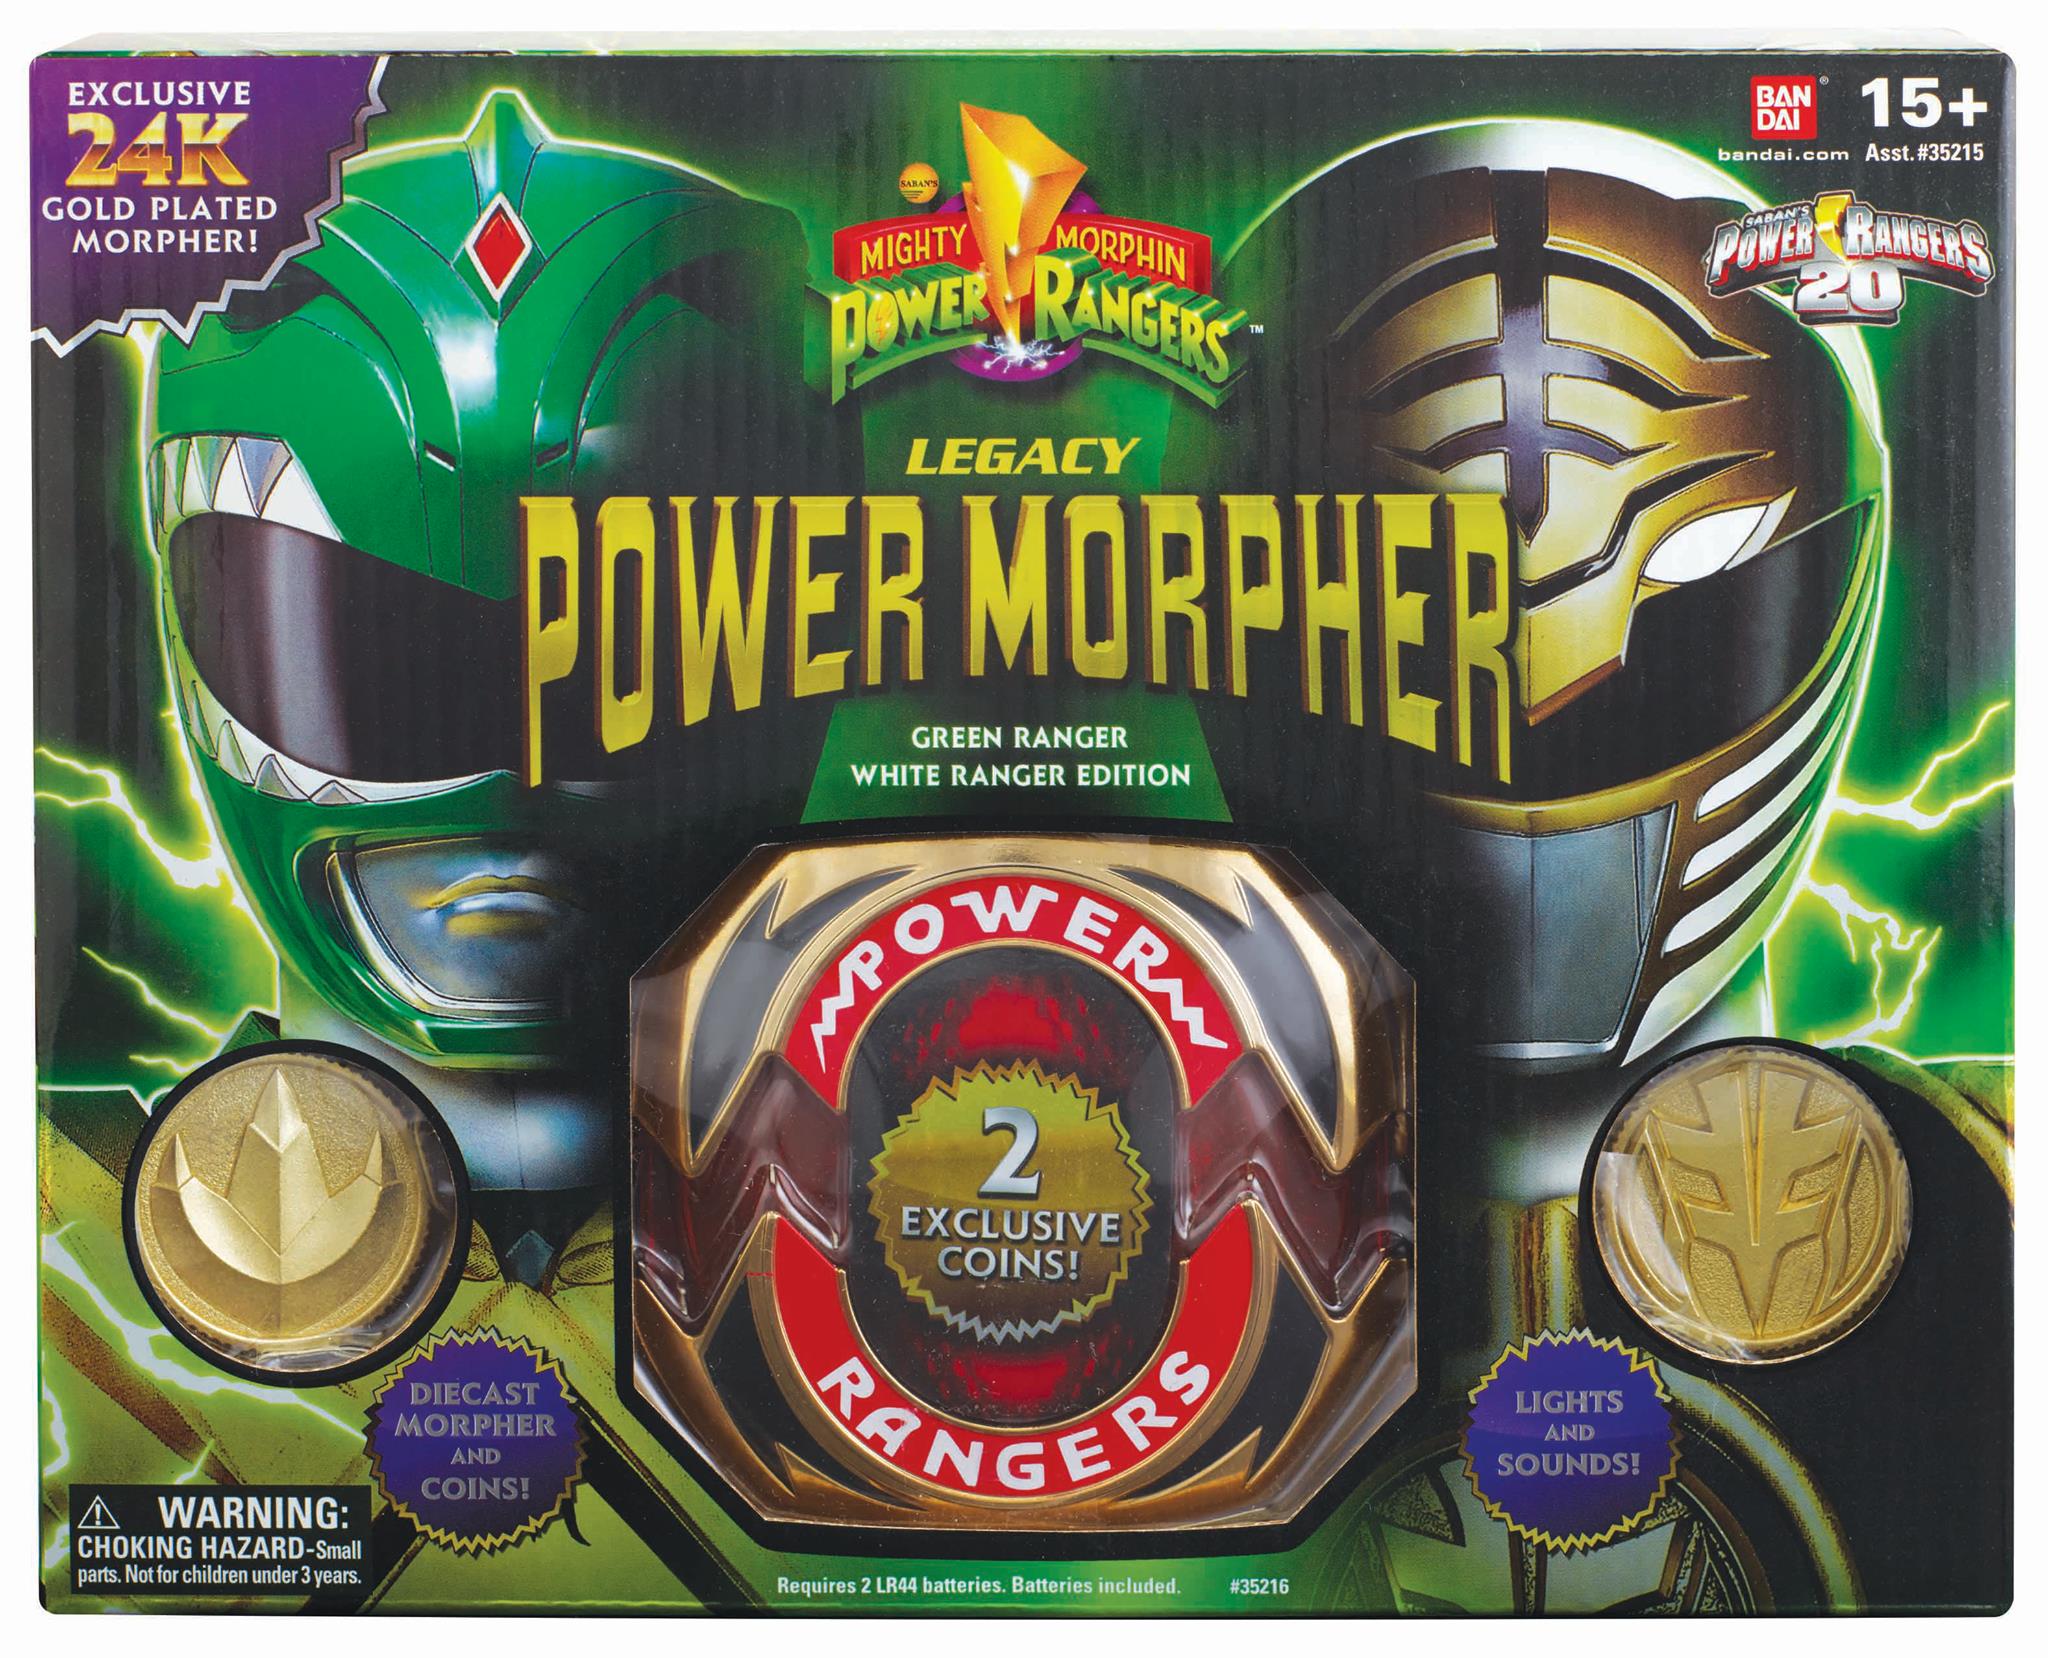 Bandai America Announces Power Rangers Sdcc Exclusives Awesometoyblog